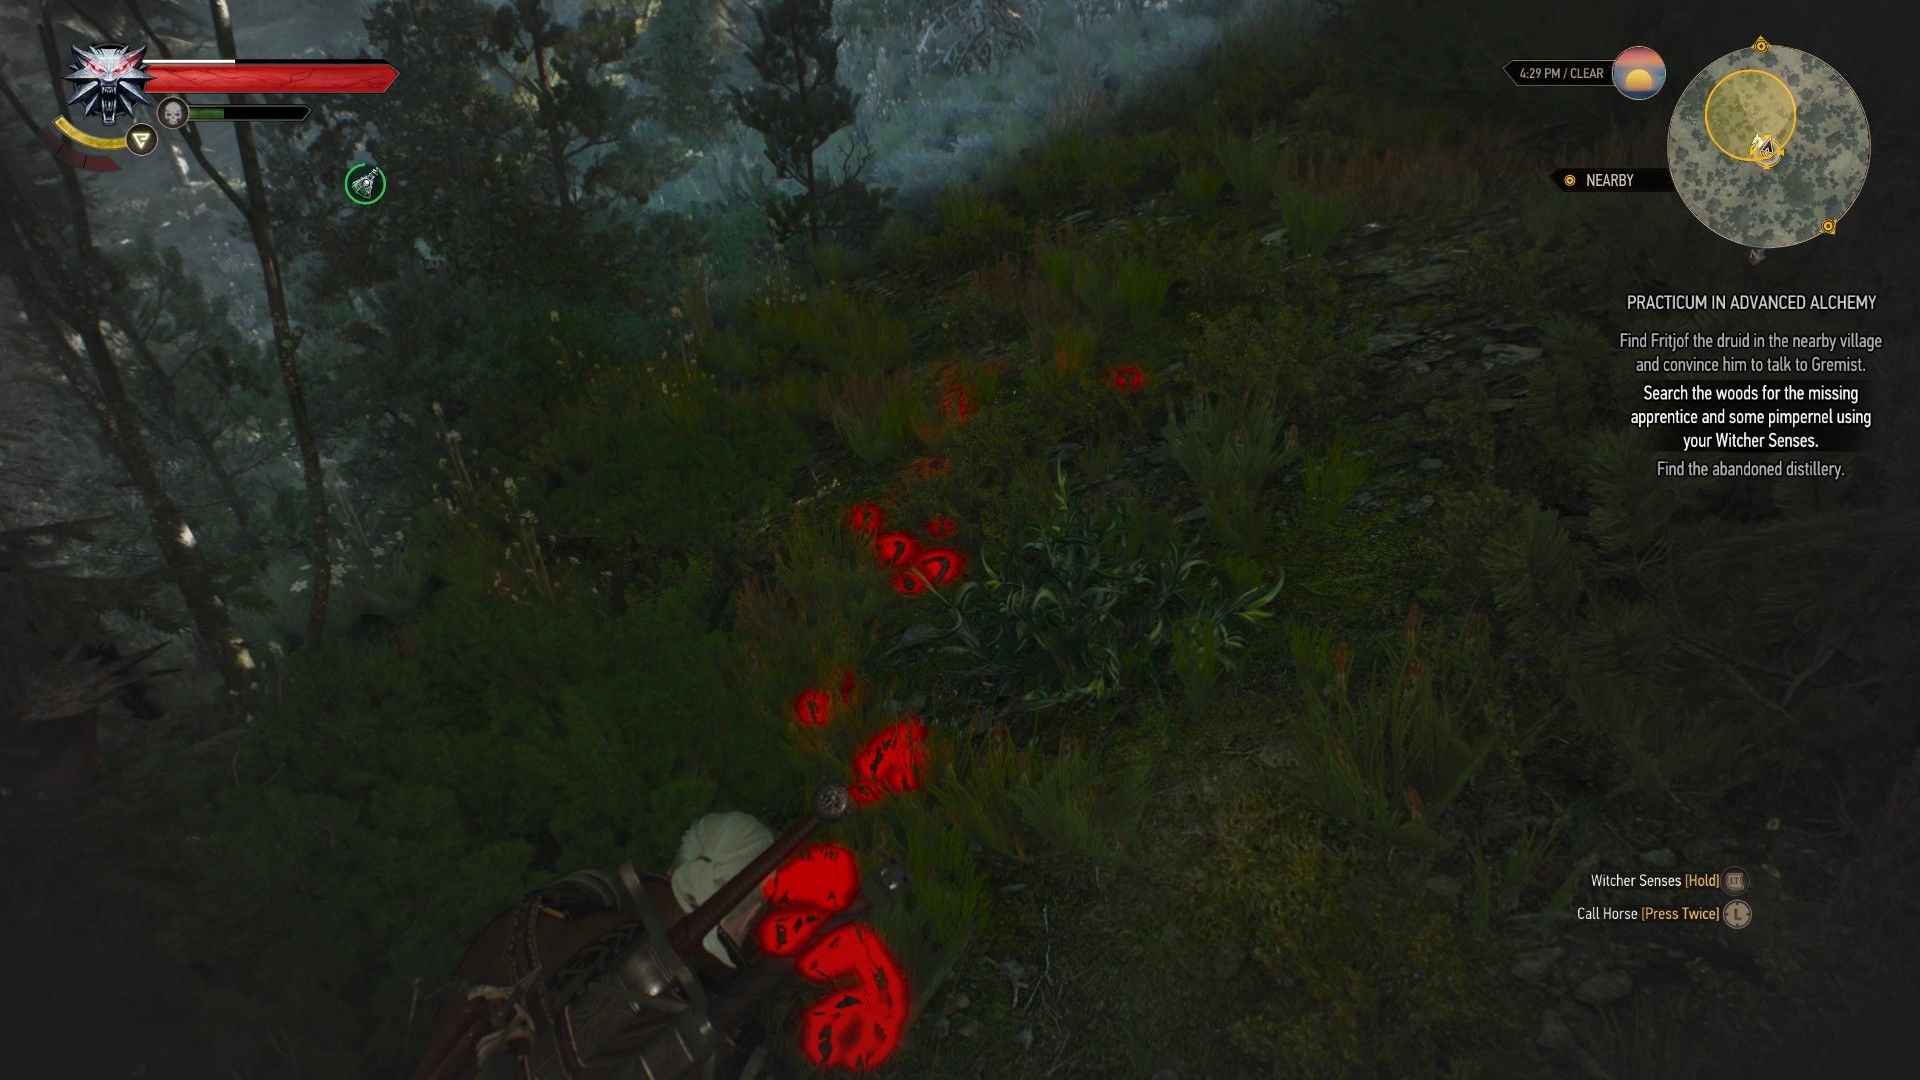 Geralt's Witcher Senses highlights a series of hoof marks leading to the monster.